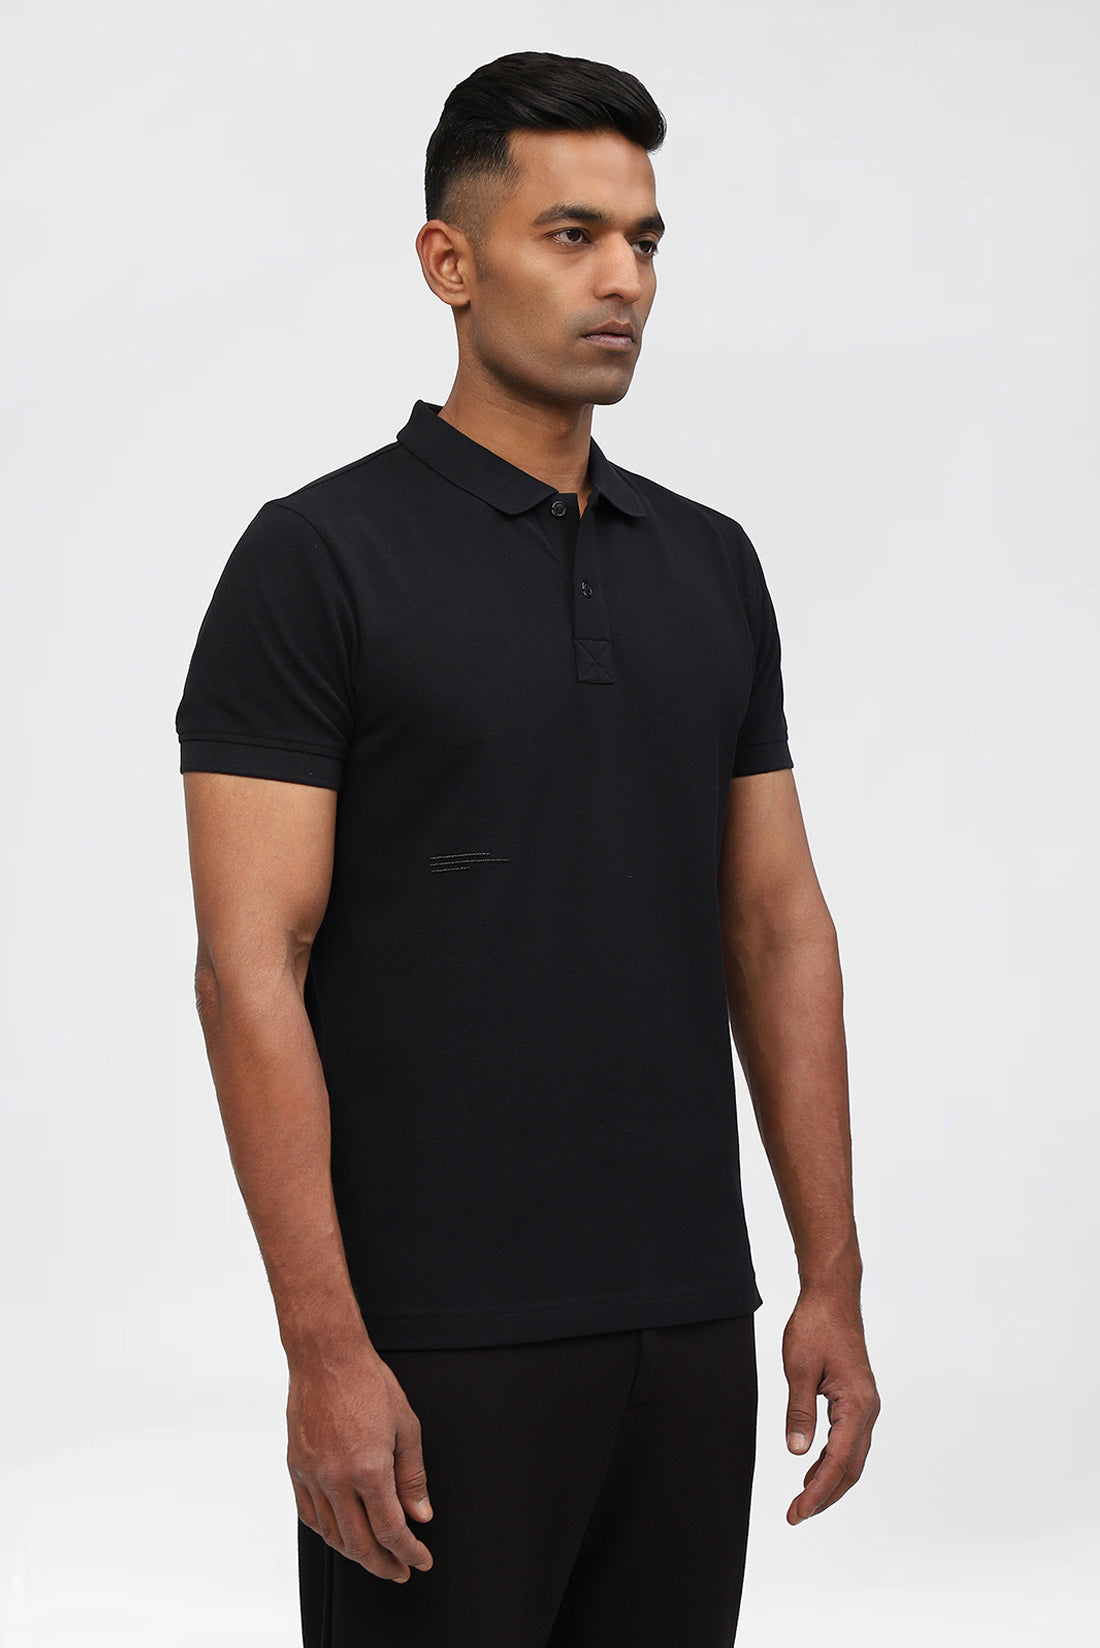 Classic Men's Polo T-Shirt With Floral Genes Monogram